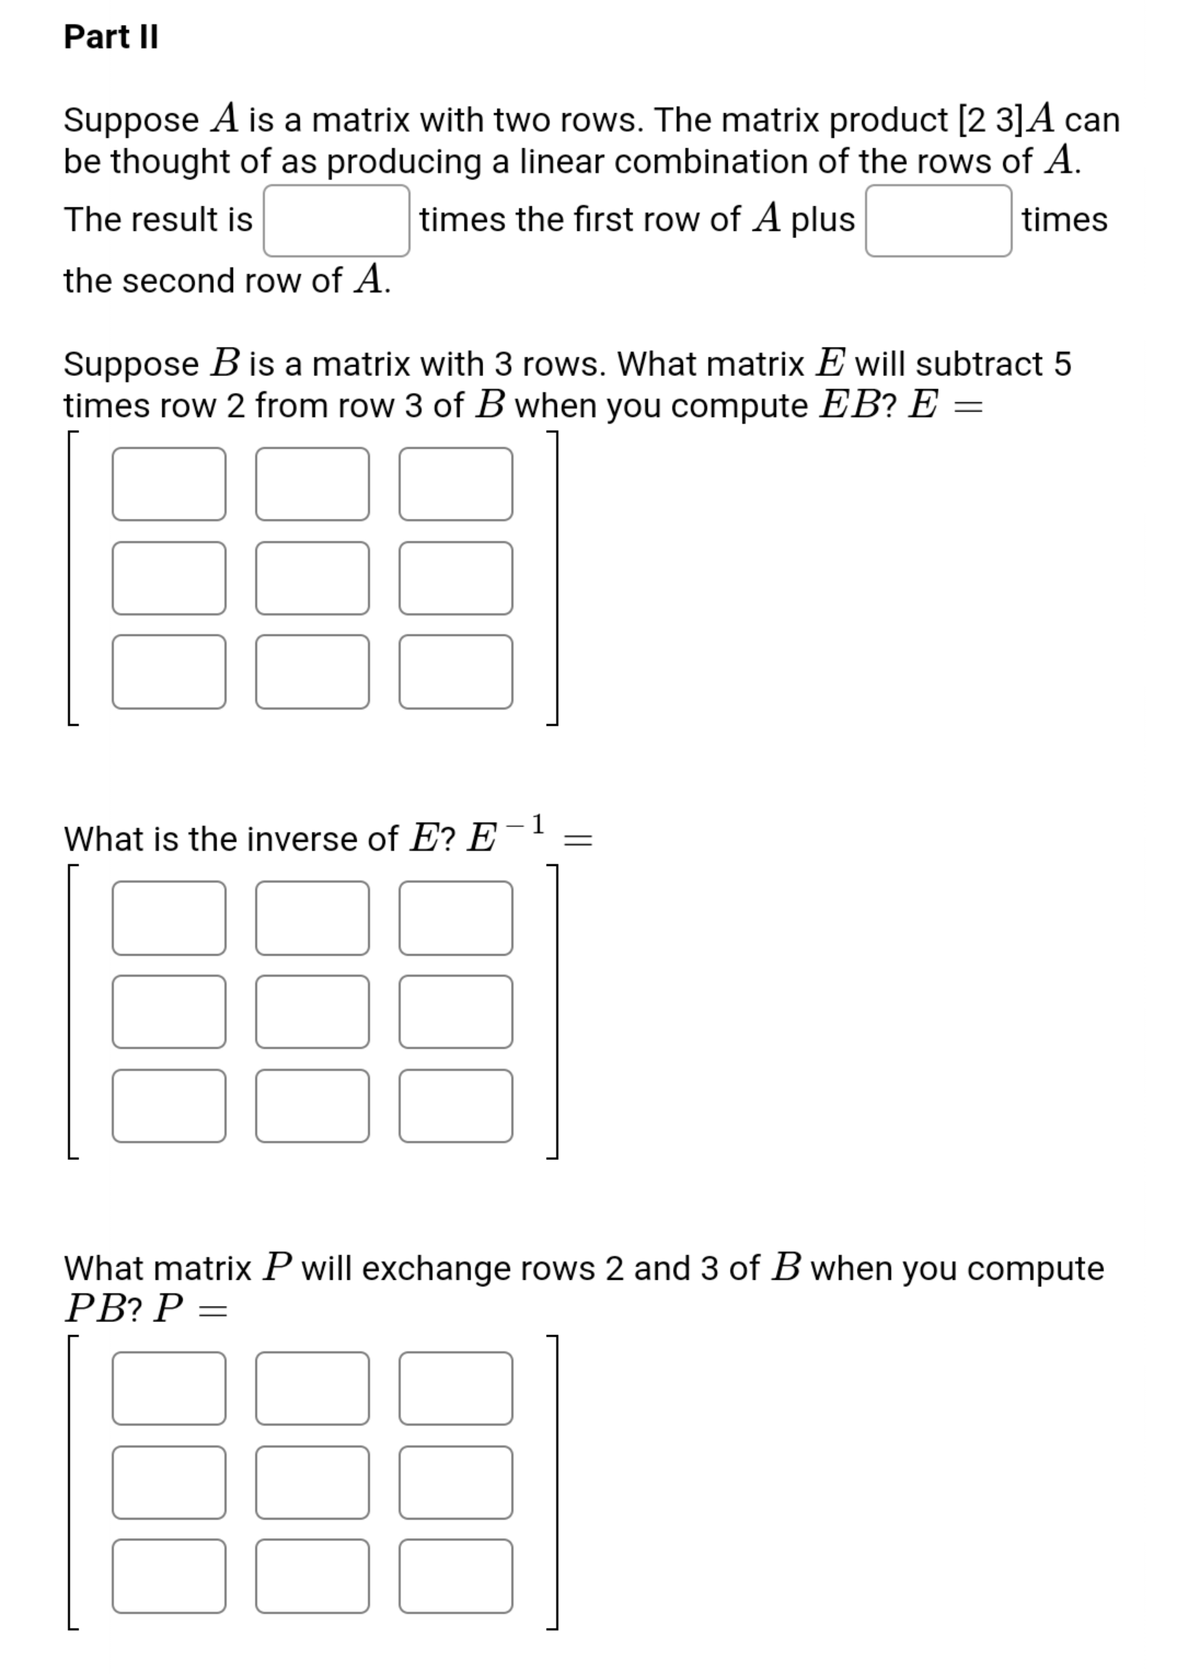 Part II
Suppose A is a matrix with two rows. The matrix product [2 3]A can
be thought of as producing a linear combination of the rows of A.
The result is
times the first row of A plus
times
the second row of A.
Suppose Bis a matrix with 3 rows. What matrix E will subtract 5
times row 2 from row 3 of B when you compute EB? E =
What is the inverse of E? E
What matrix P will exchange rows 2 and 3 of B when you compute
PR? Р —
%3D
